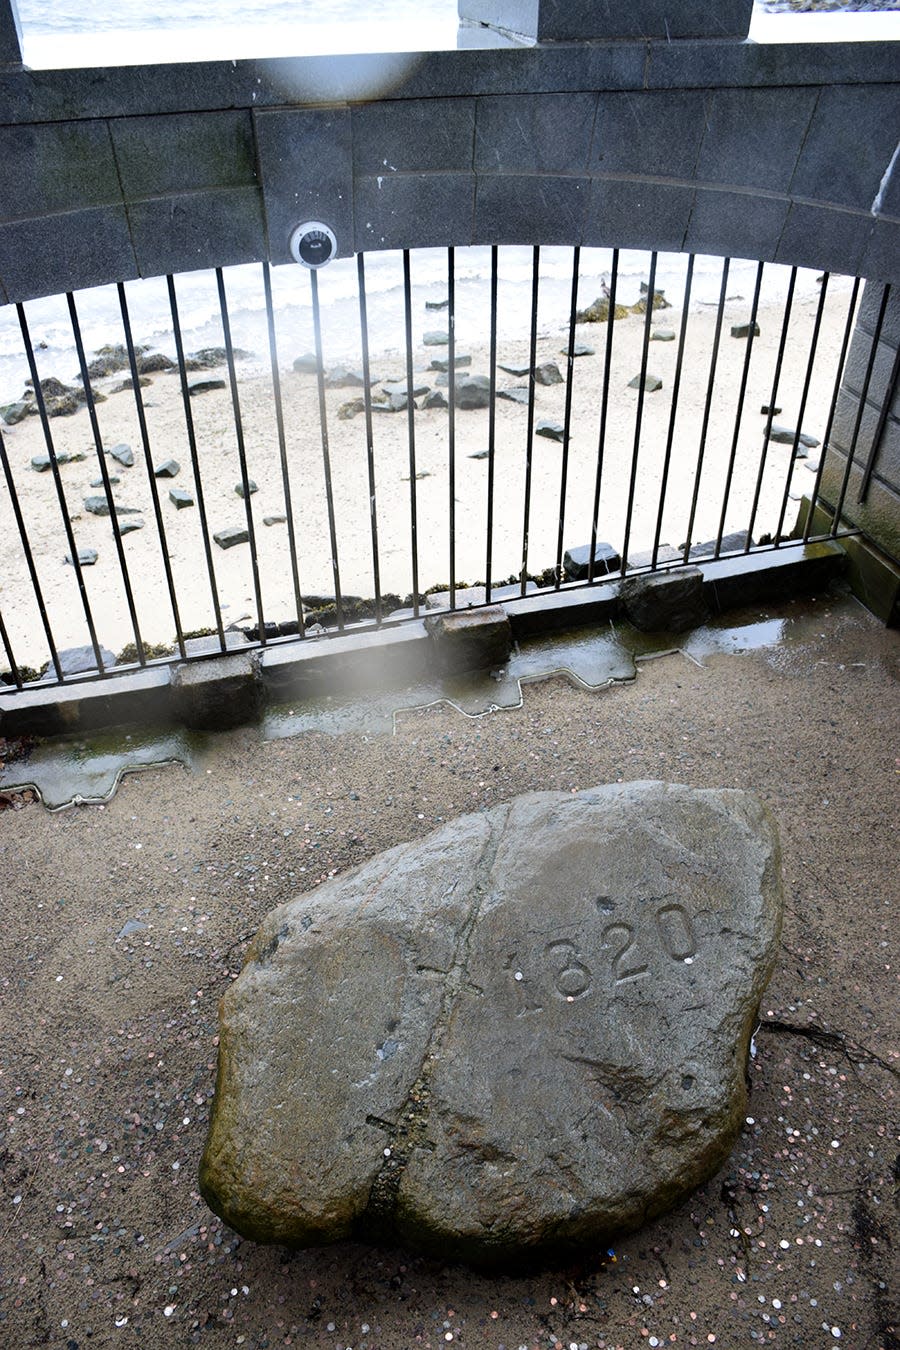 Plymouth Rock, believed to have been at the site of the Pilgrims’ landing in 1620, now is protected under a portico on the beach at Plymouth, Massachusetts.